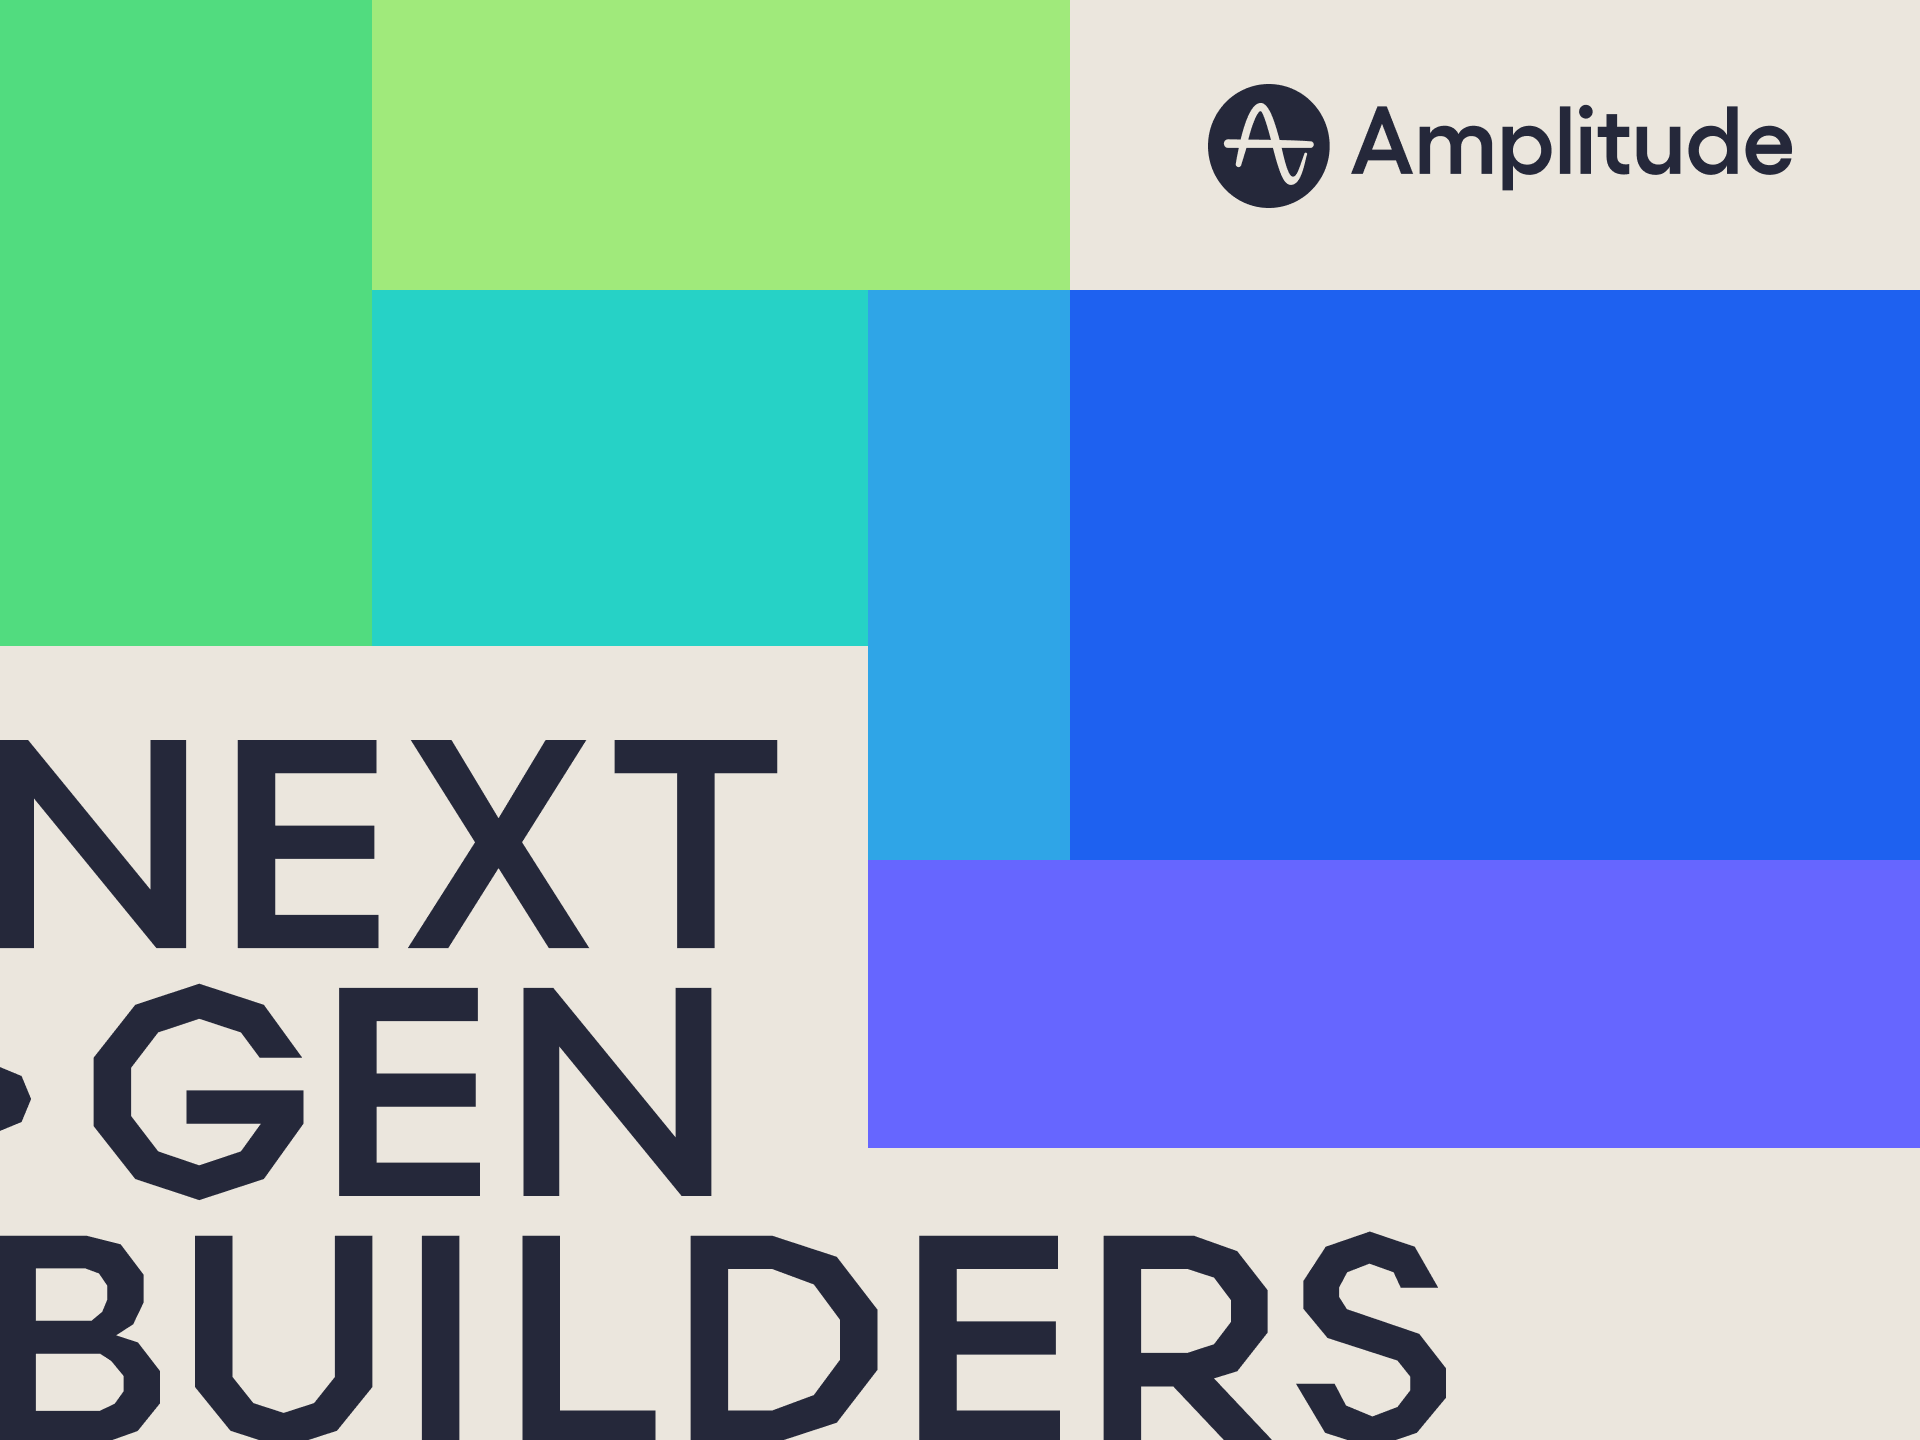 Graphic block treatment of Podcast text Next Gen Builders presented by Amplitude